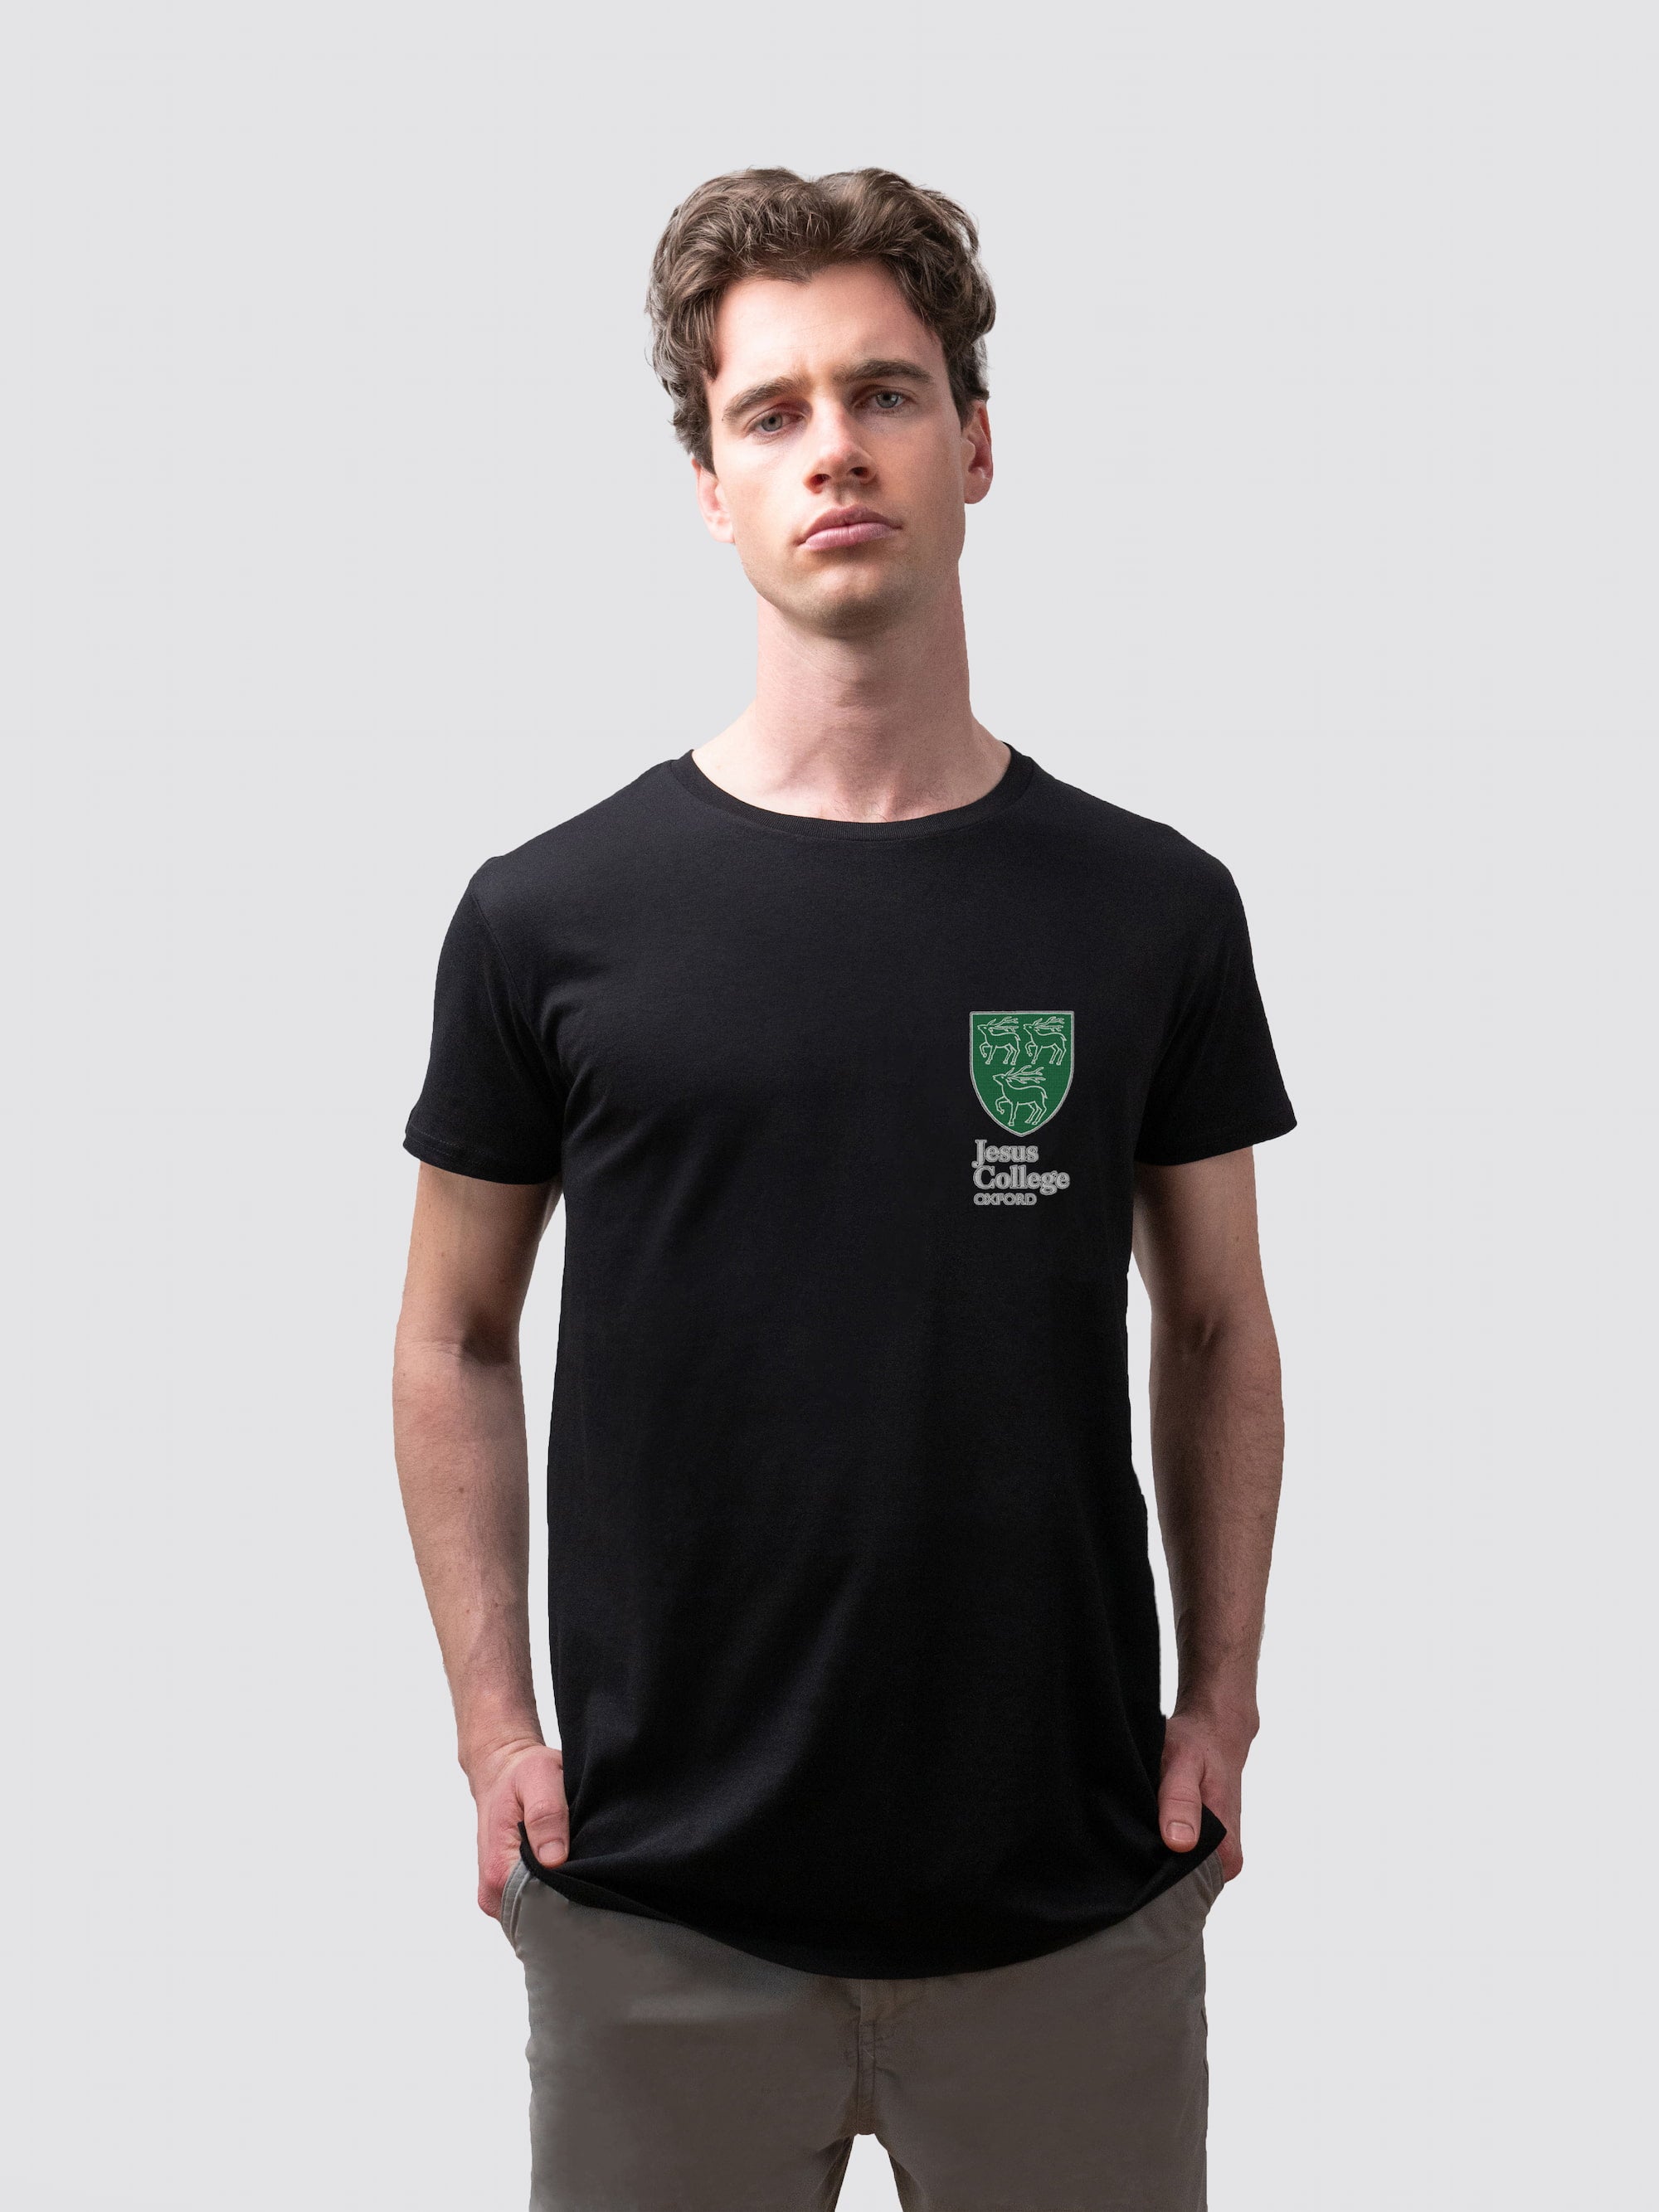 Sustainable Jesus College t-shirt, made from organic cotton